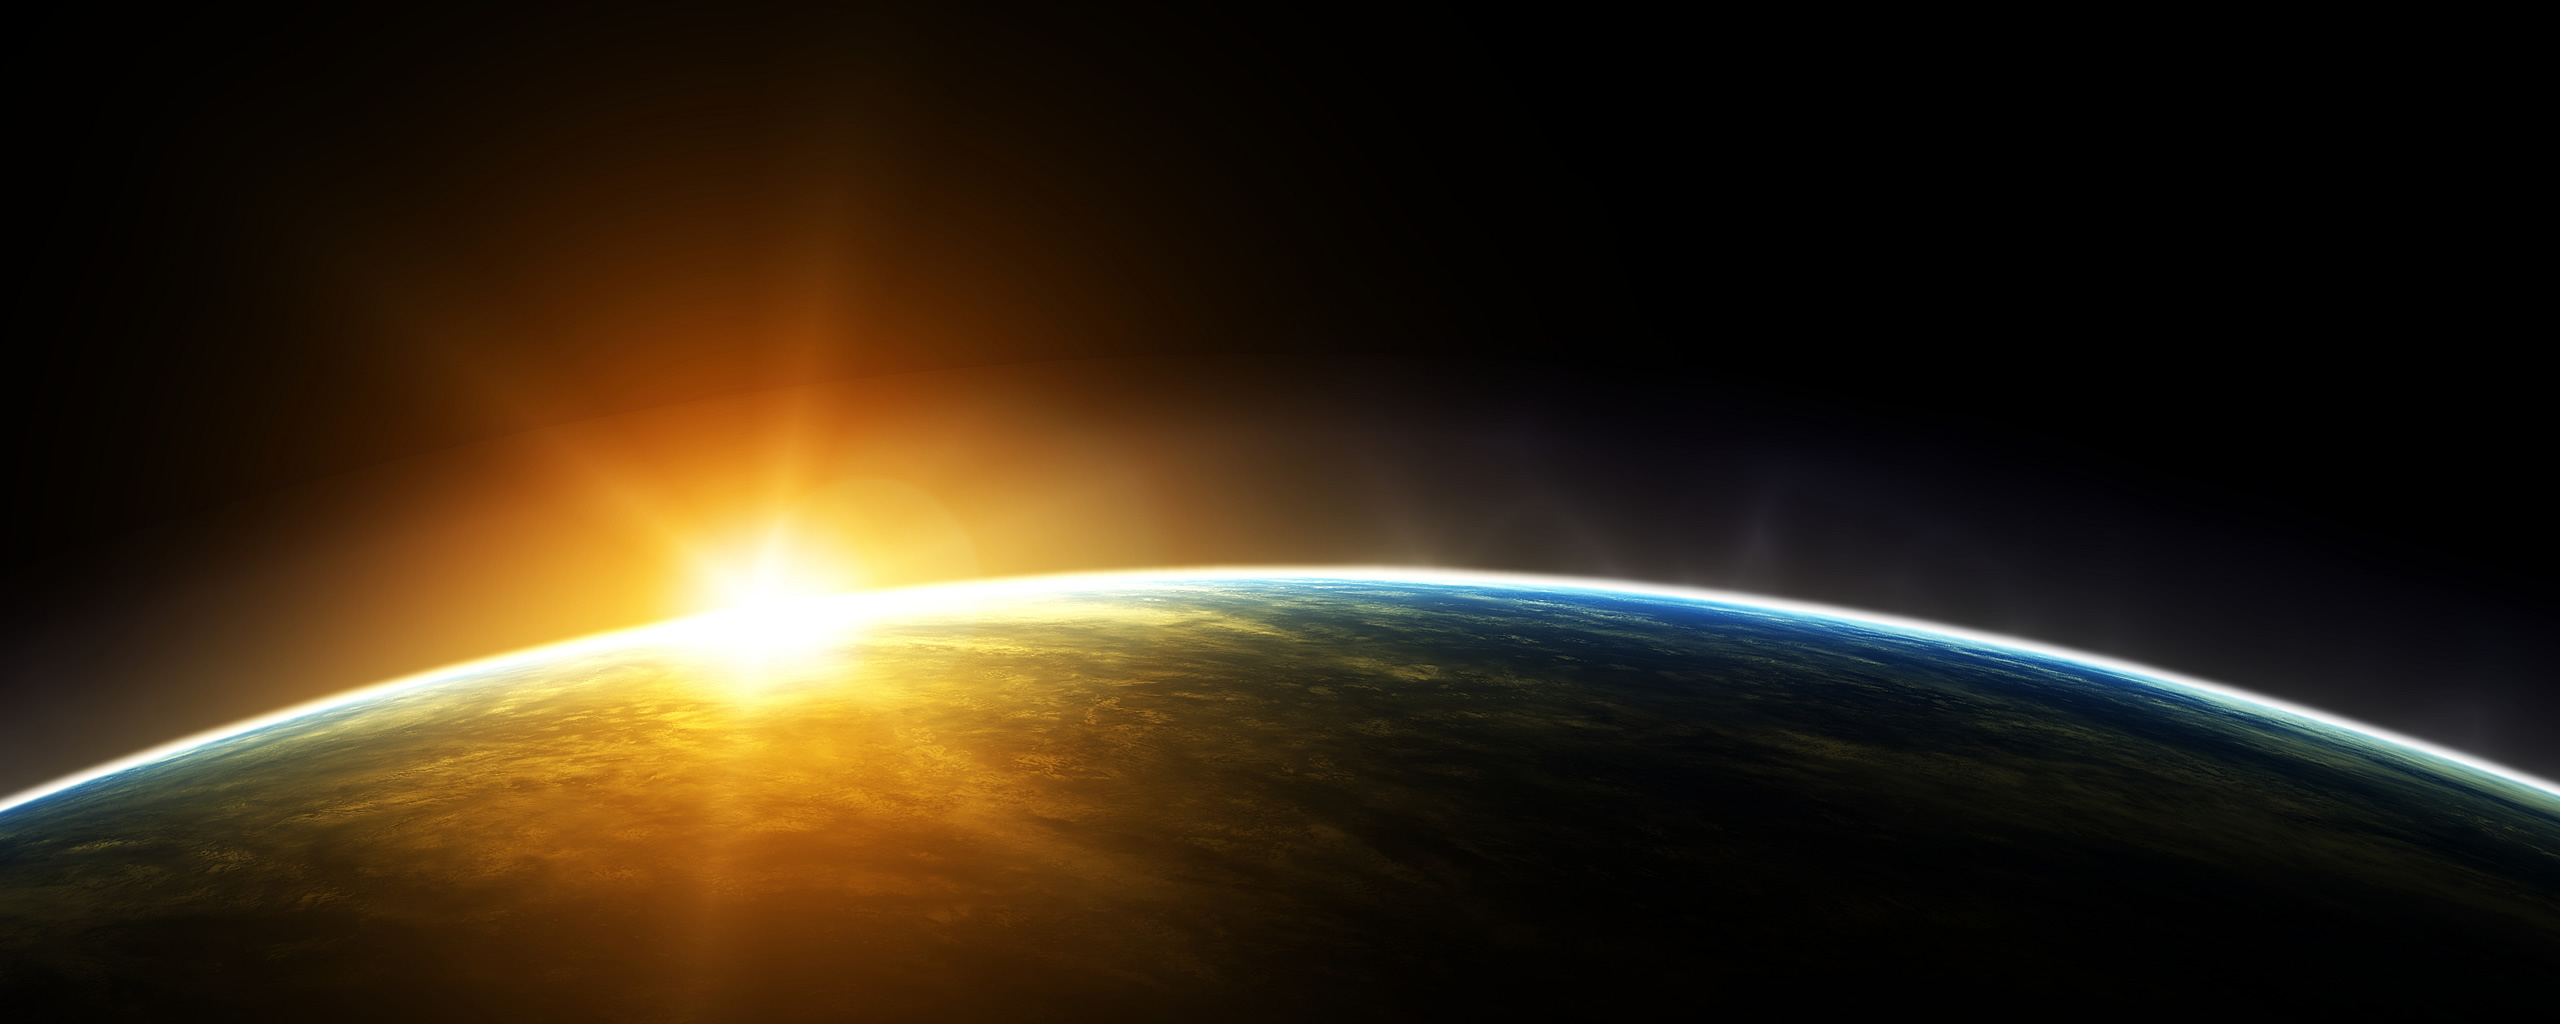 Earth From Space Space Sunrise 2560x1024